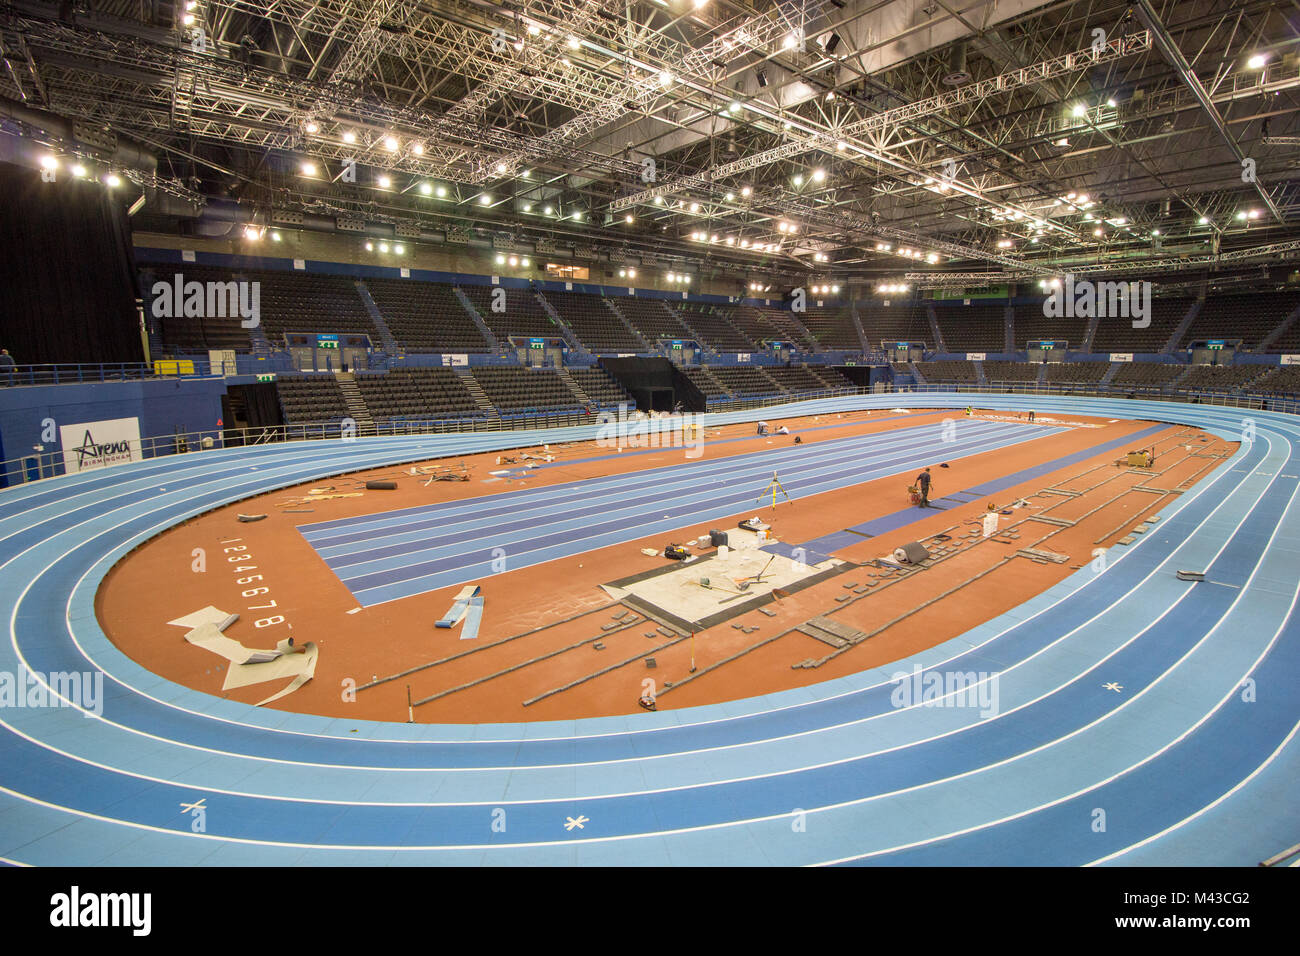 The Birmingham Arena, being prepared for the World Indoor Athletic